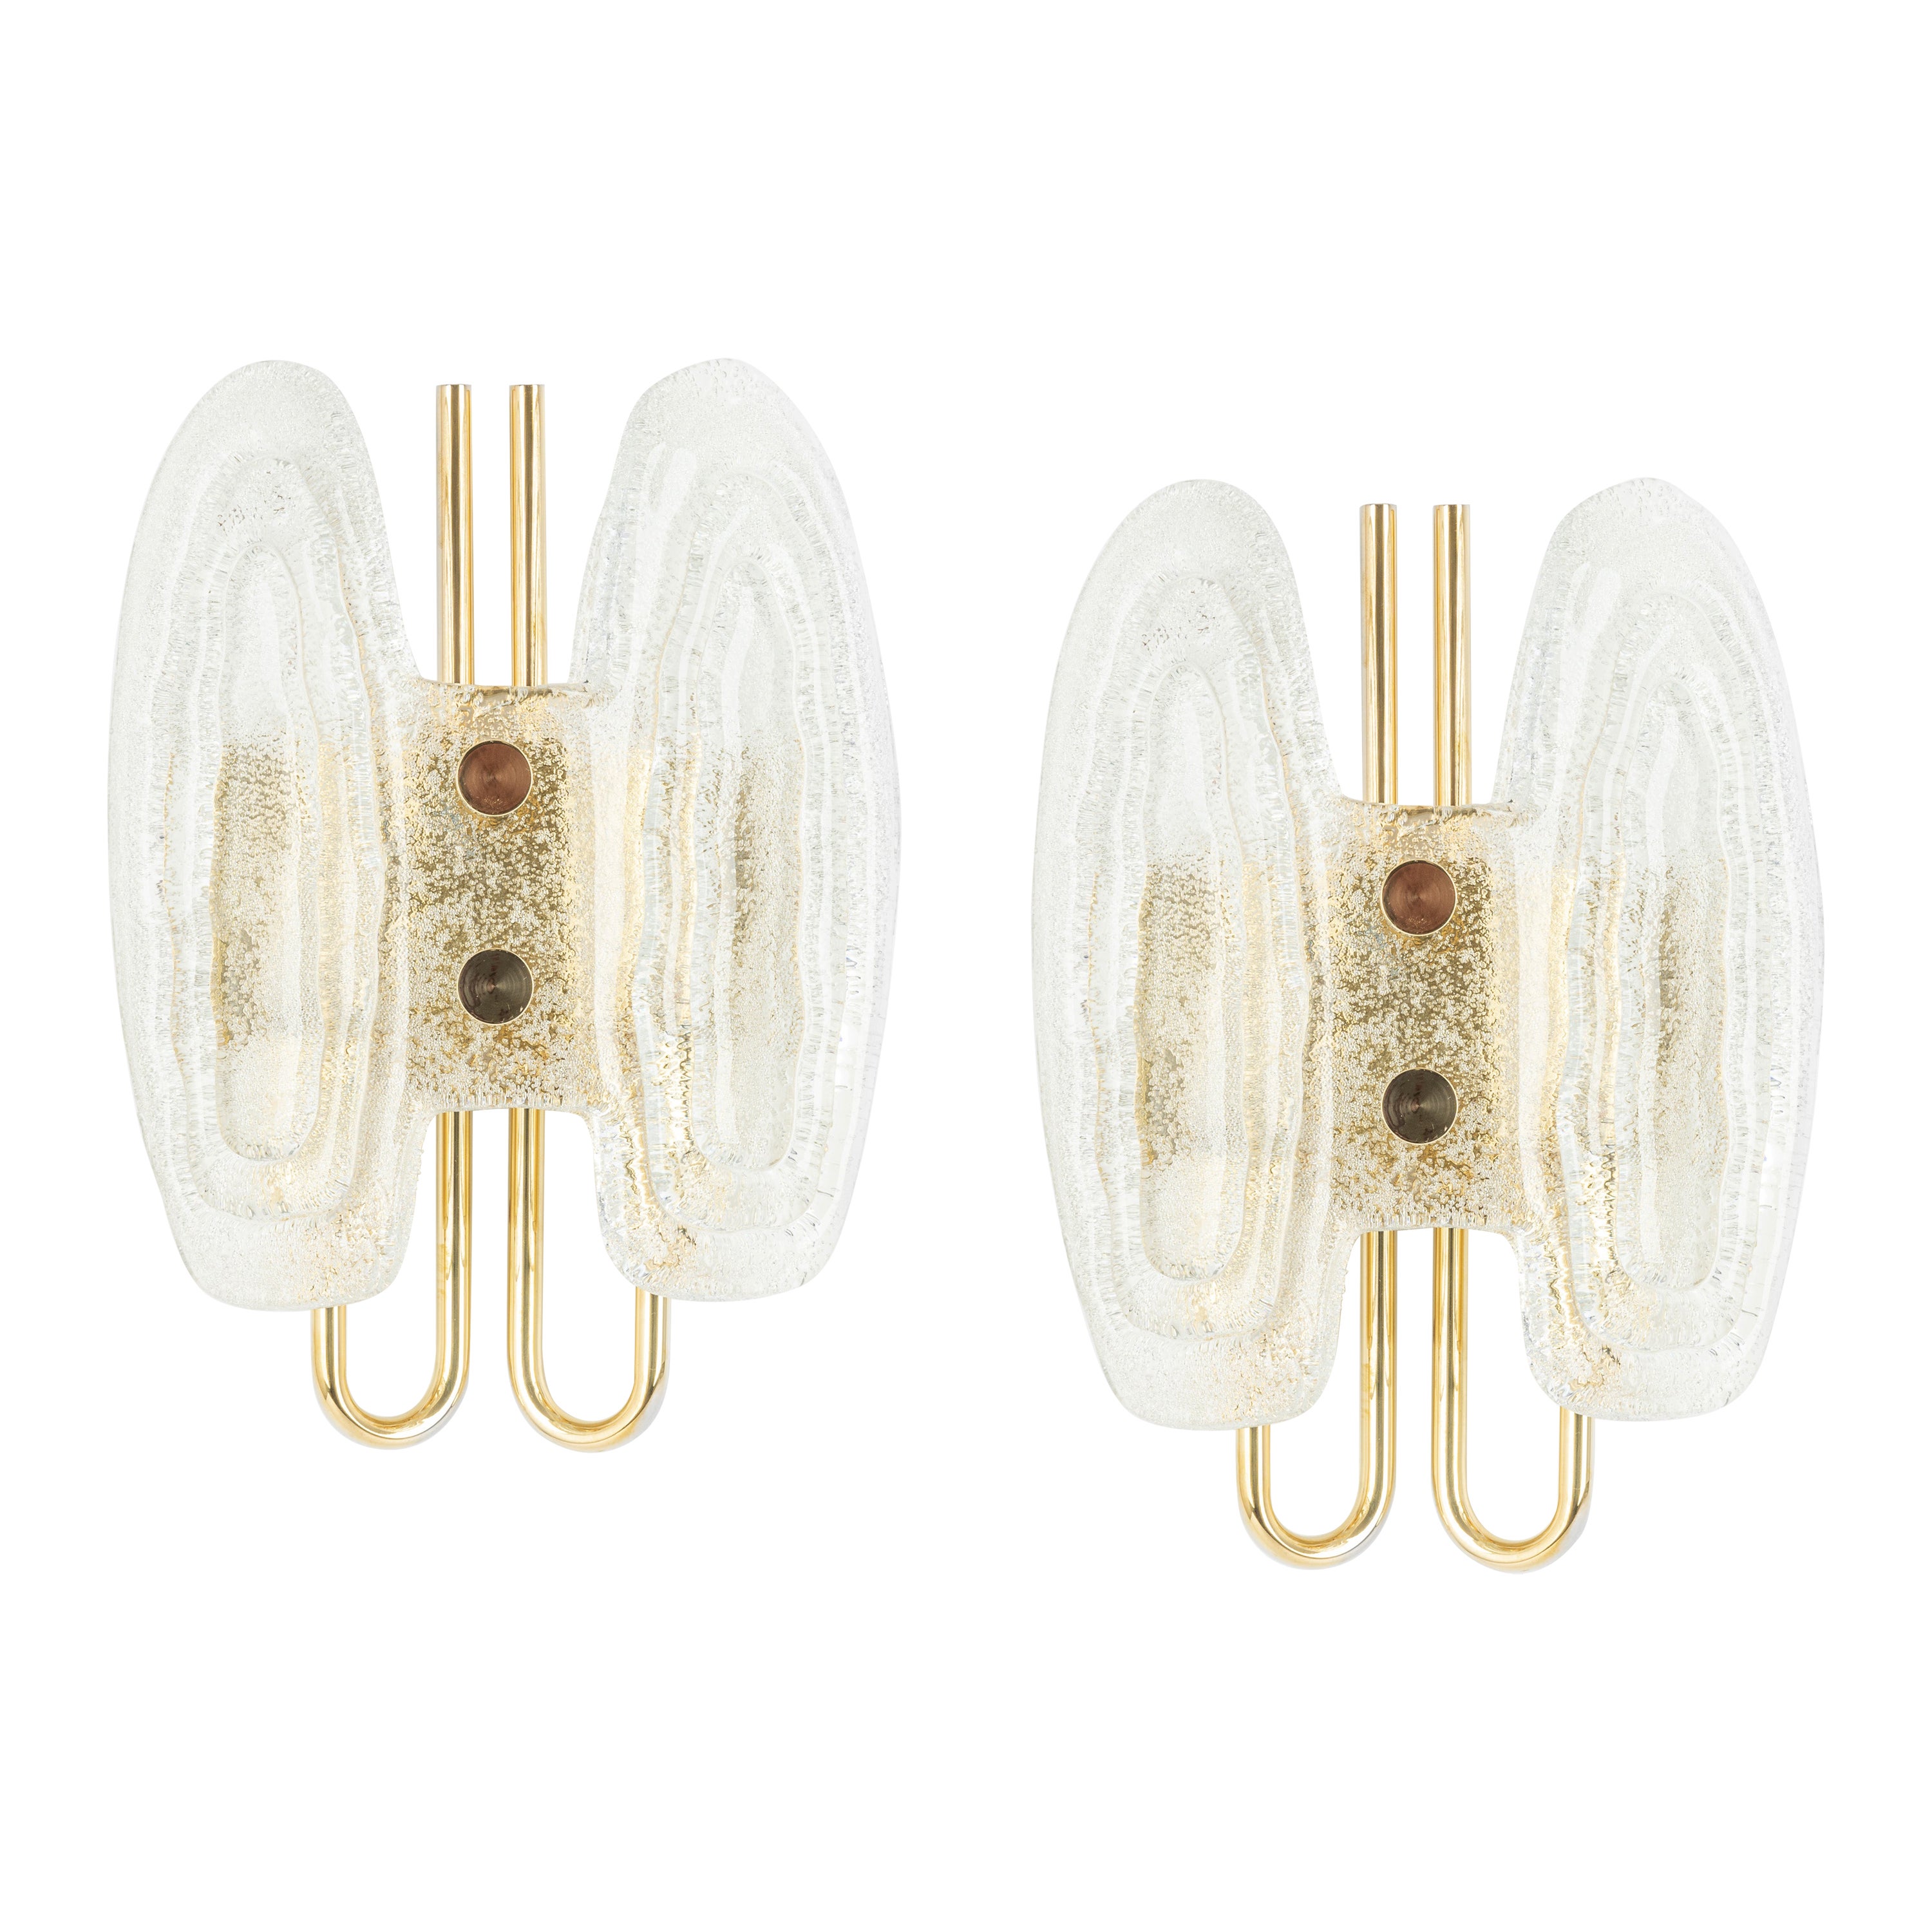 Pair of Murano Ice Glass Brass Sconces by Hillebrand, Germany, 1970s For Sale